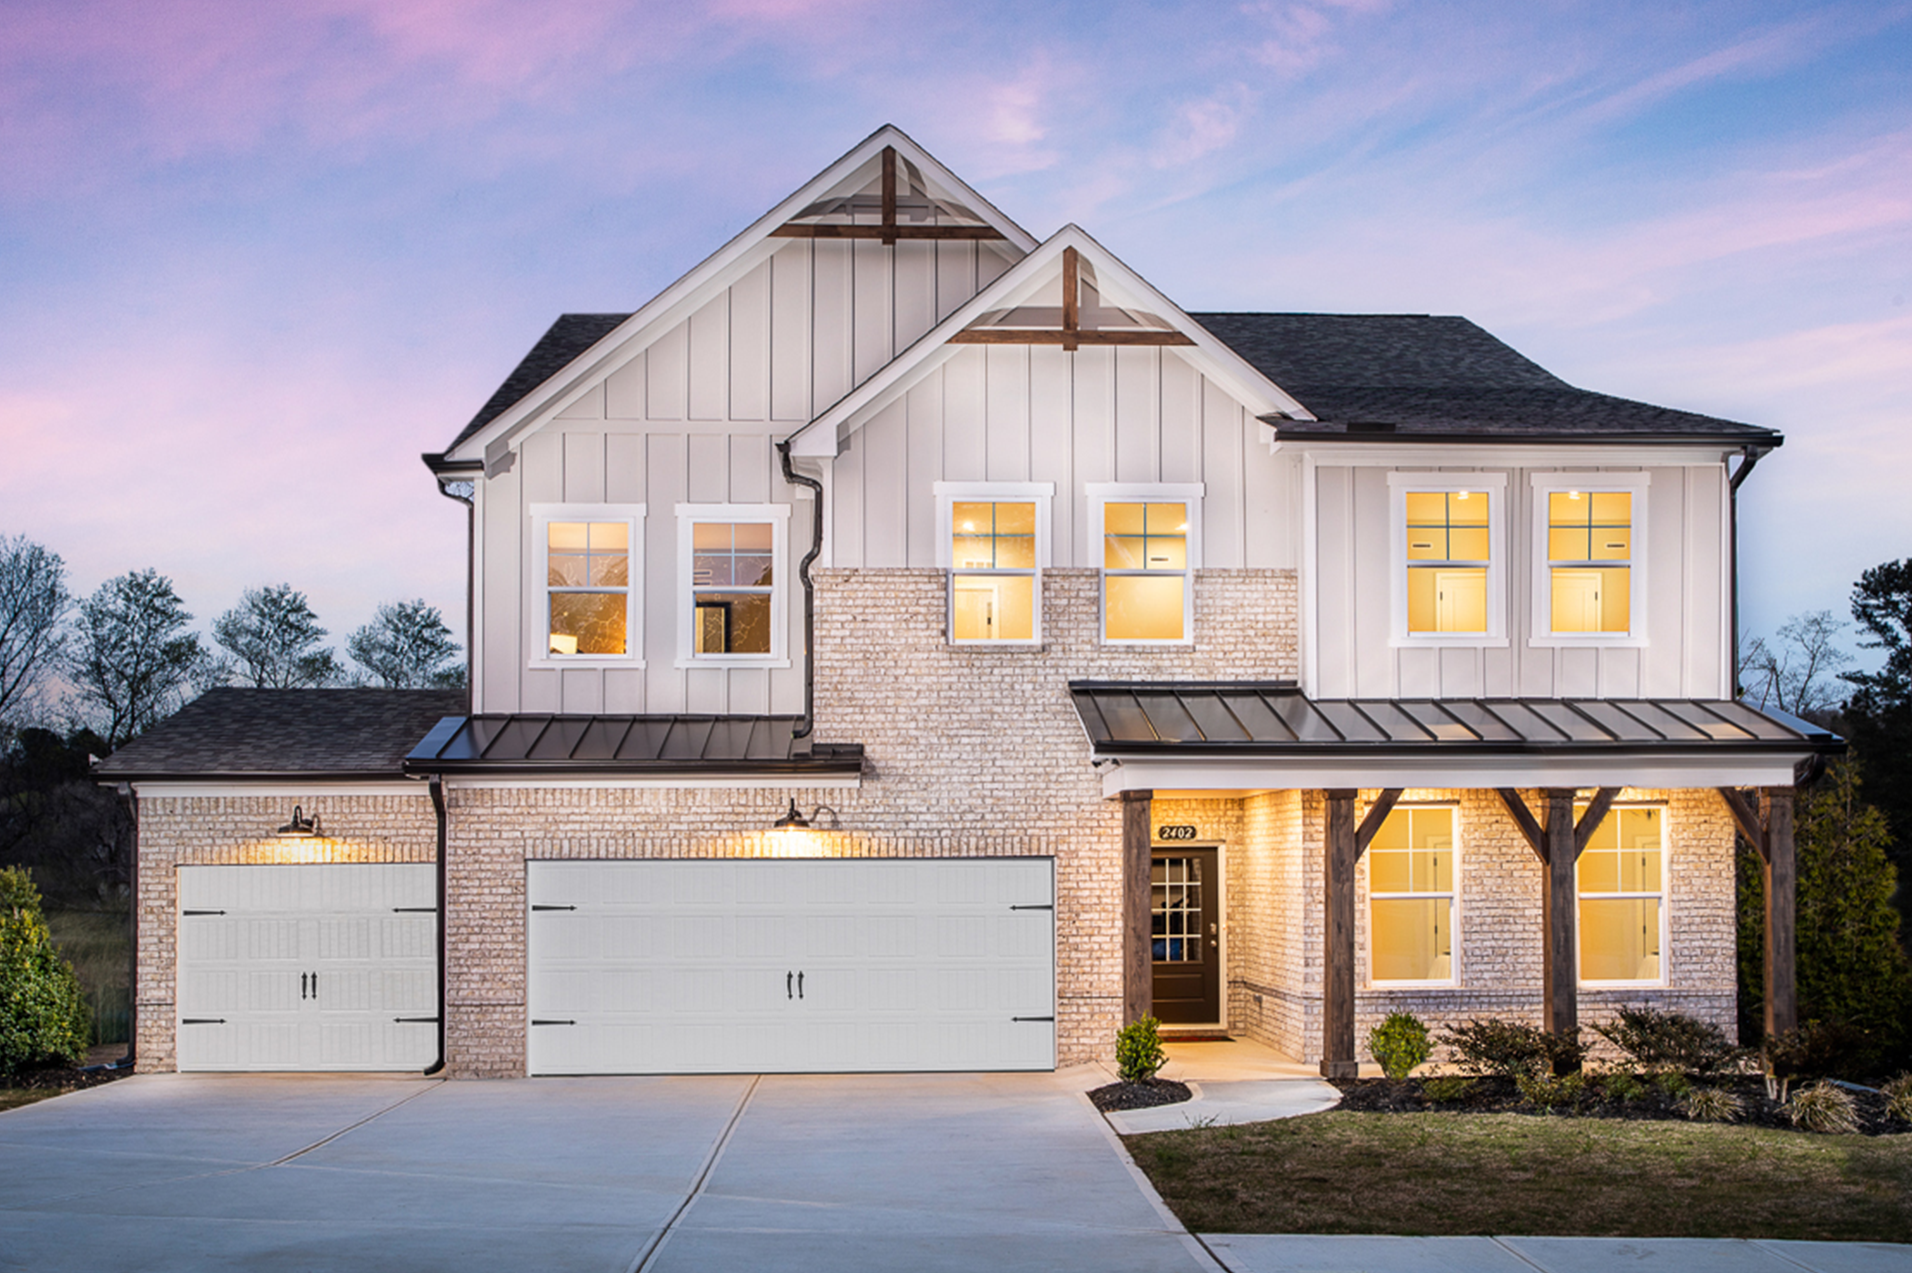 Two-story Beazer home with 3-car garage